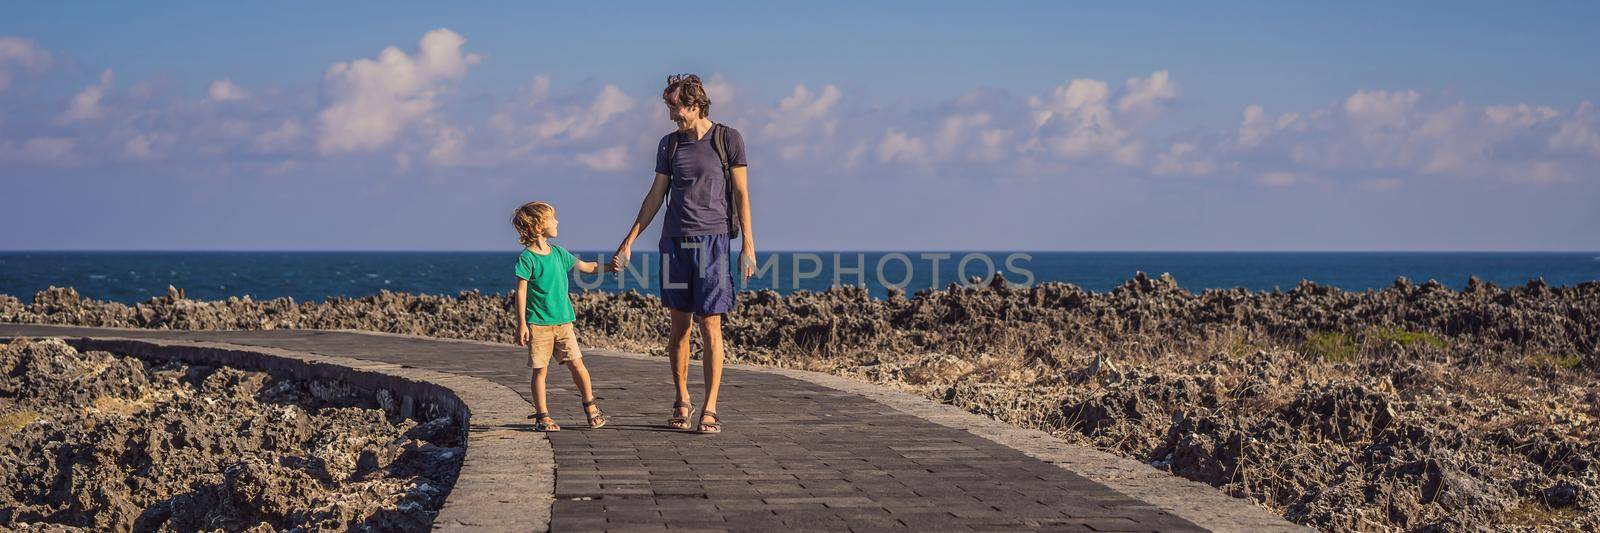 Father and son travelers on amazing Nusadua, Waterbloom Fountain, Bali Island Indonesia. Traveling with kids concept BANNER, LONG FORMAT by galitskaya